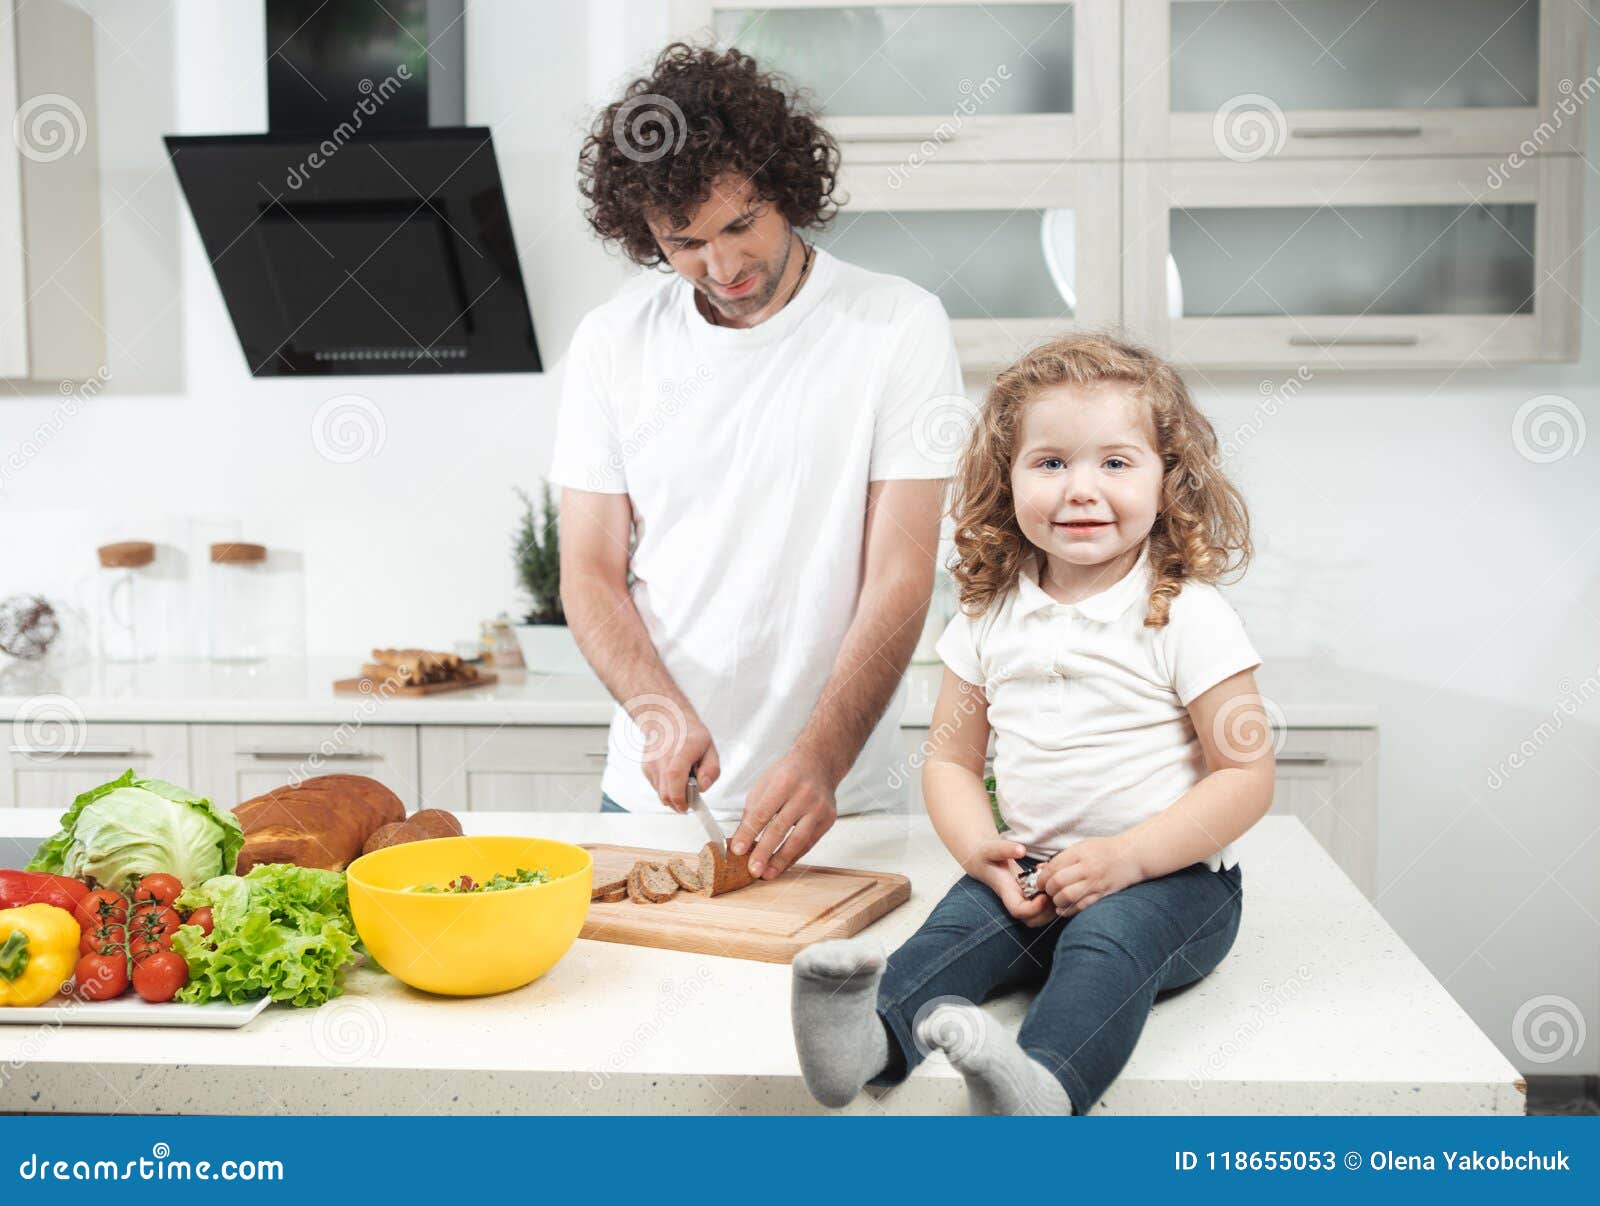 Cheerful Kid Watching Her Dad Cooking Stock Image - Image of healthy ...